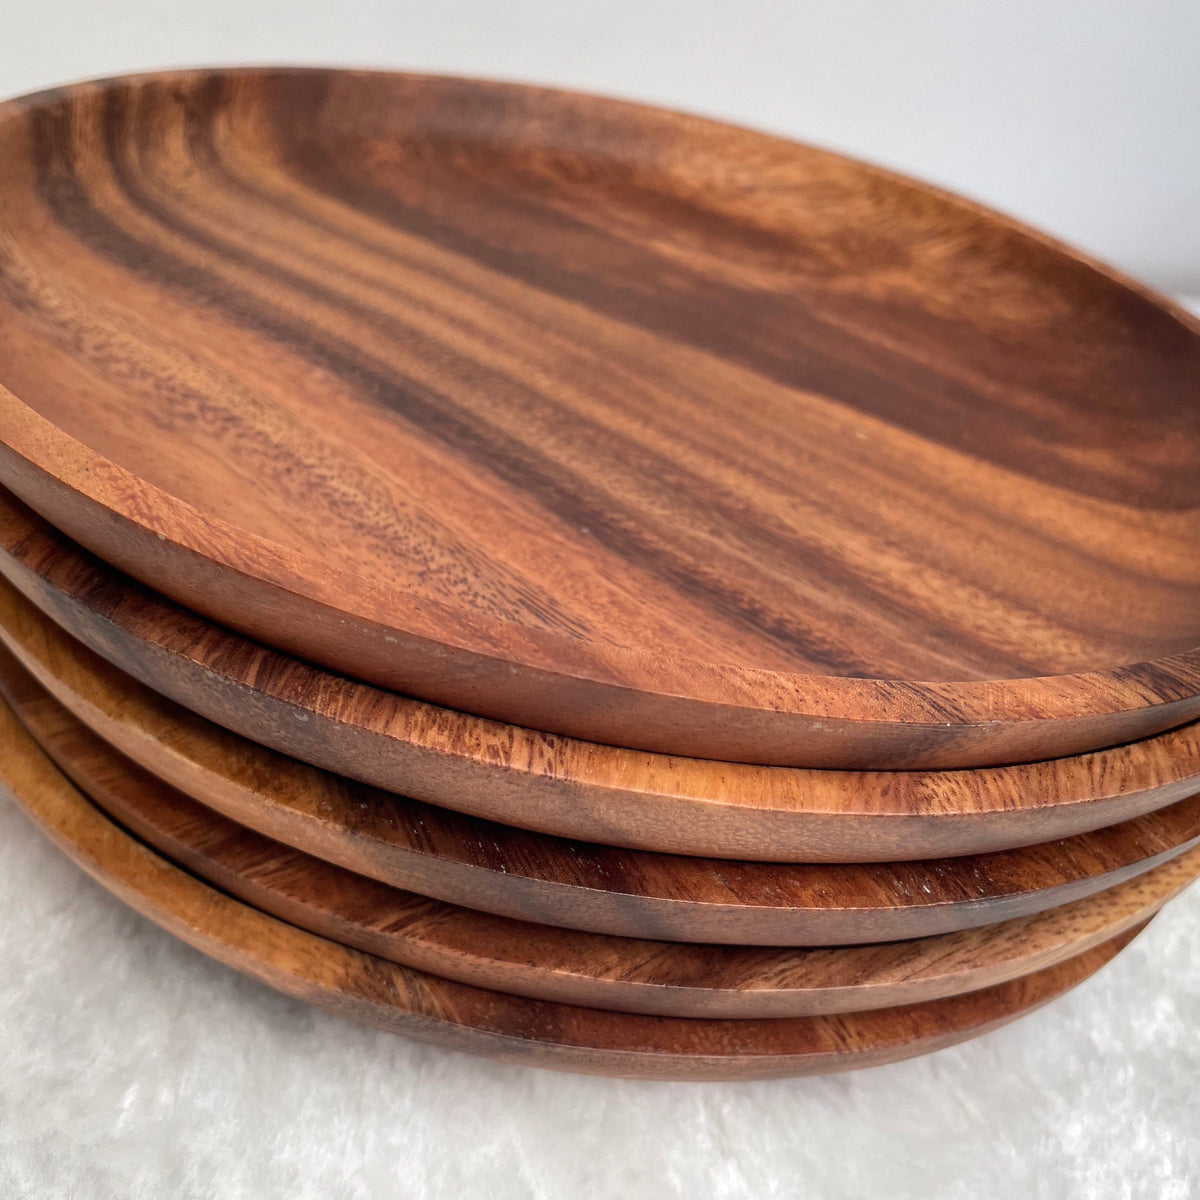 Handmade Acacia Wooden Round Plate, Dinner Plate, Serving plate